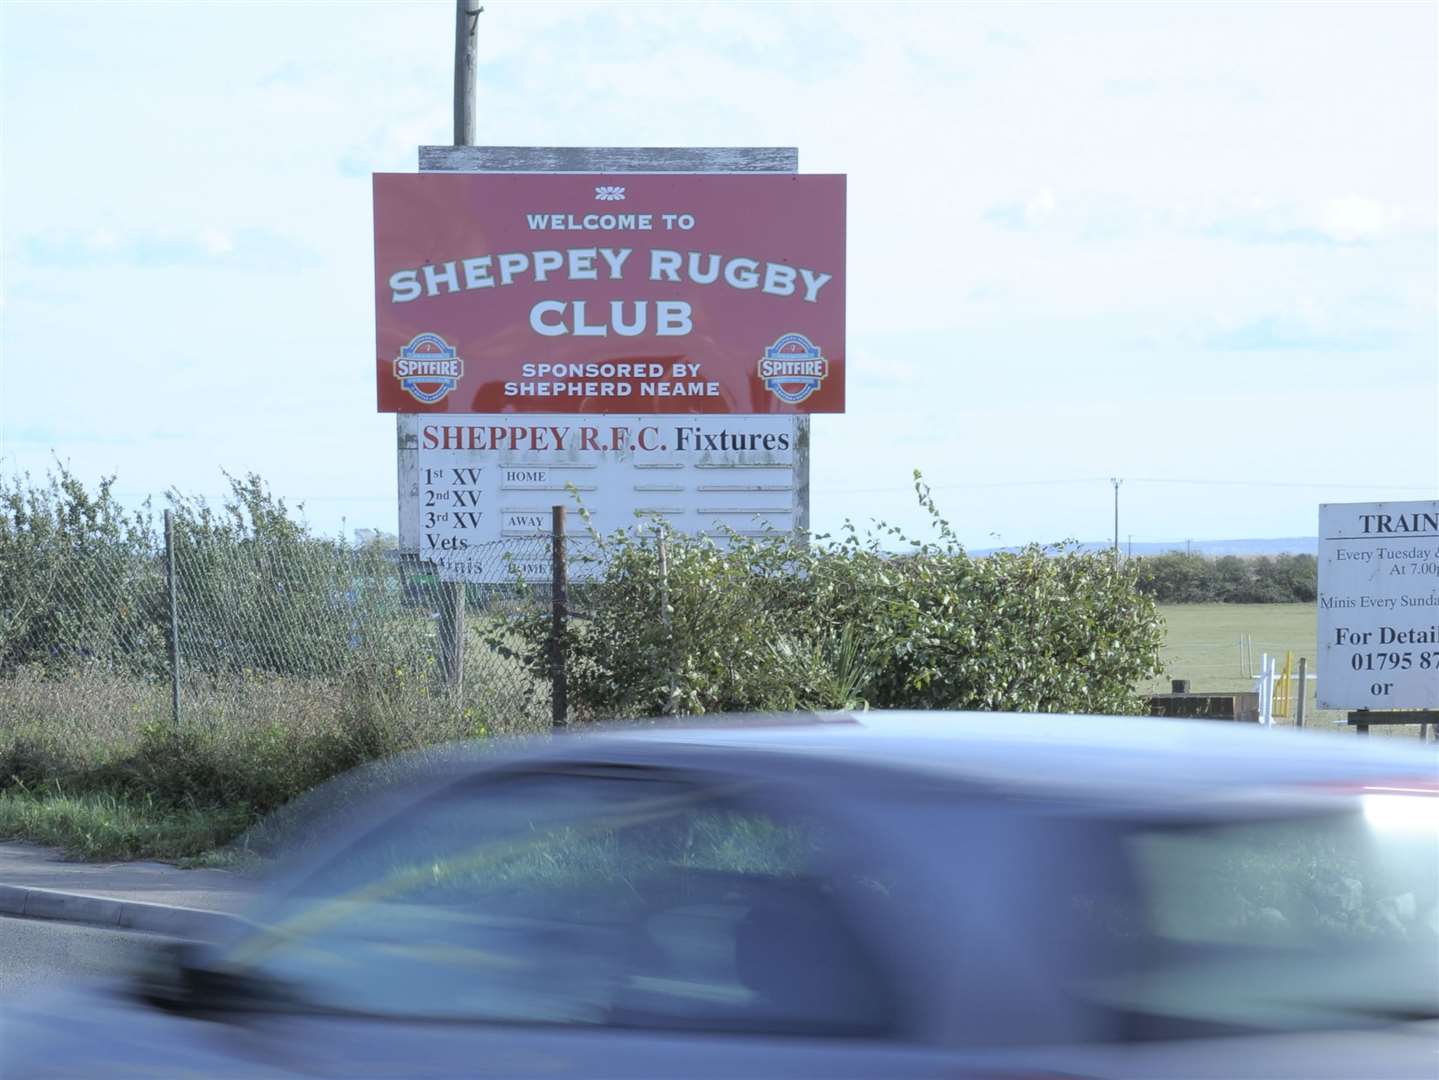 There will be no fireworks display at Sheppey Rugby Club this year